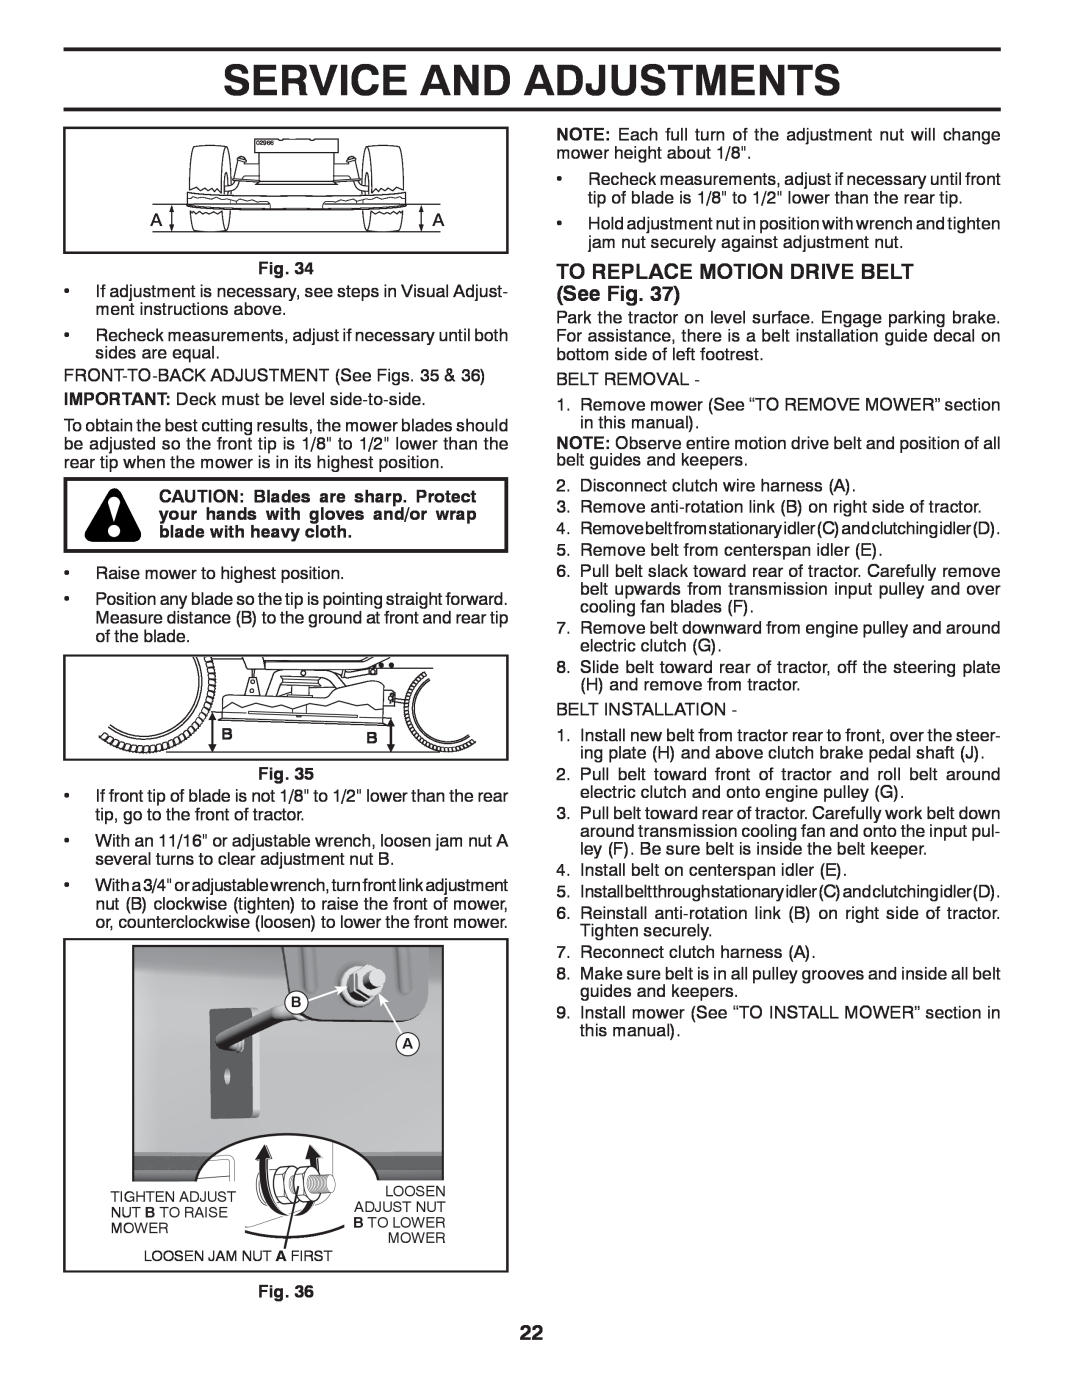 Poulan 85-50, 96042012600 manual TO REPLACE MOTION DRIVE BELT See Fig, Service And Adjustments 